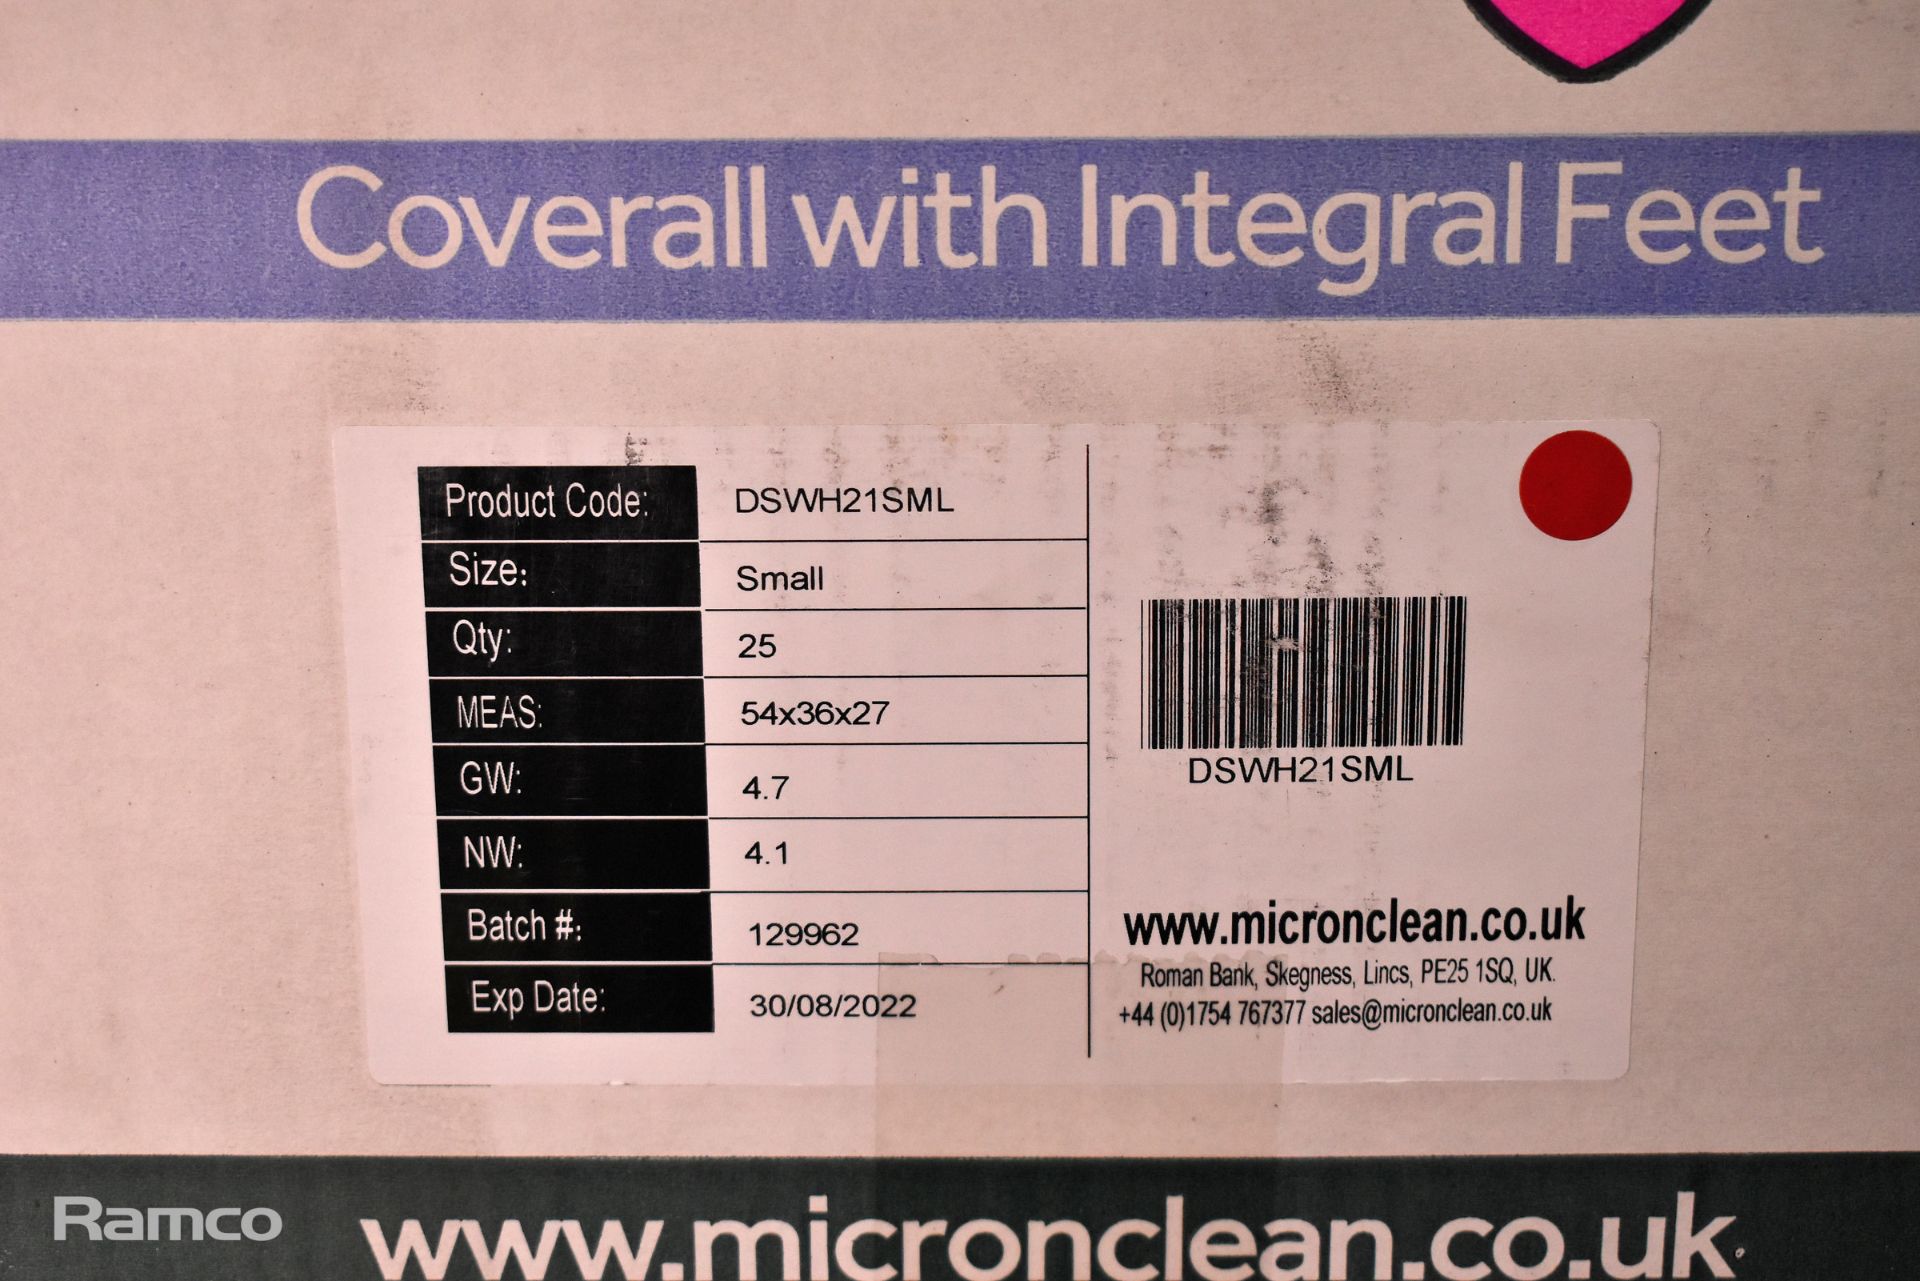 2x boxes of MicroClean SureGuard 3 coveralls - size small with integral feet - 25 units per box - Bild 3 aus 3